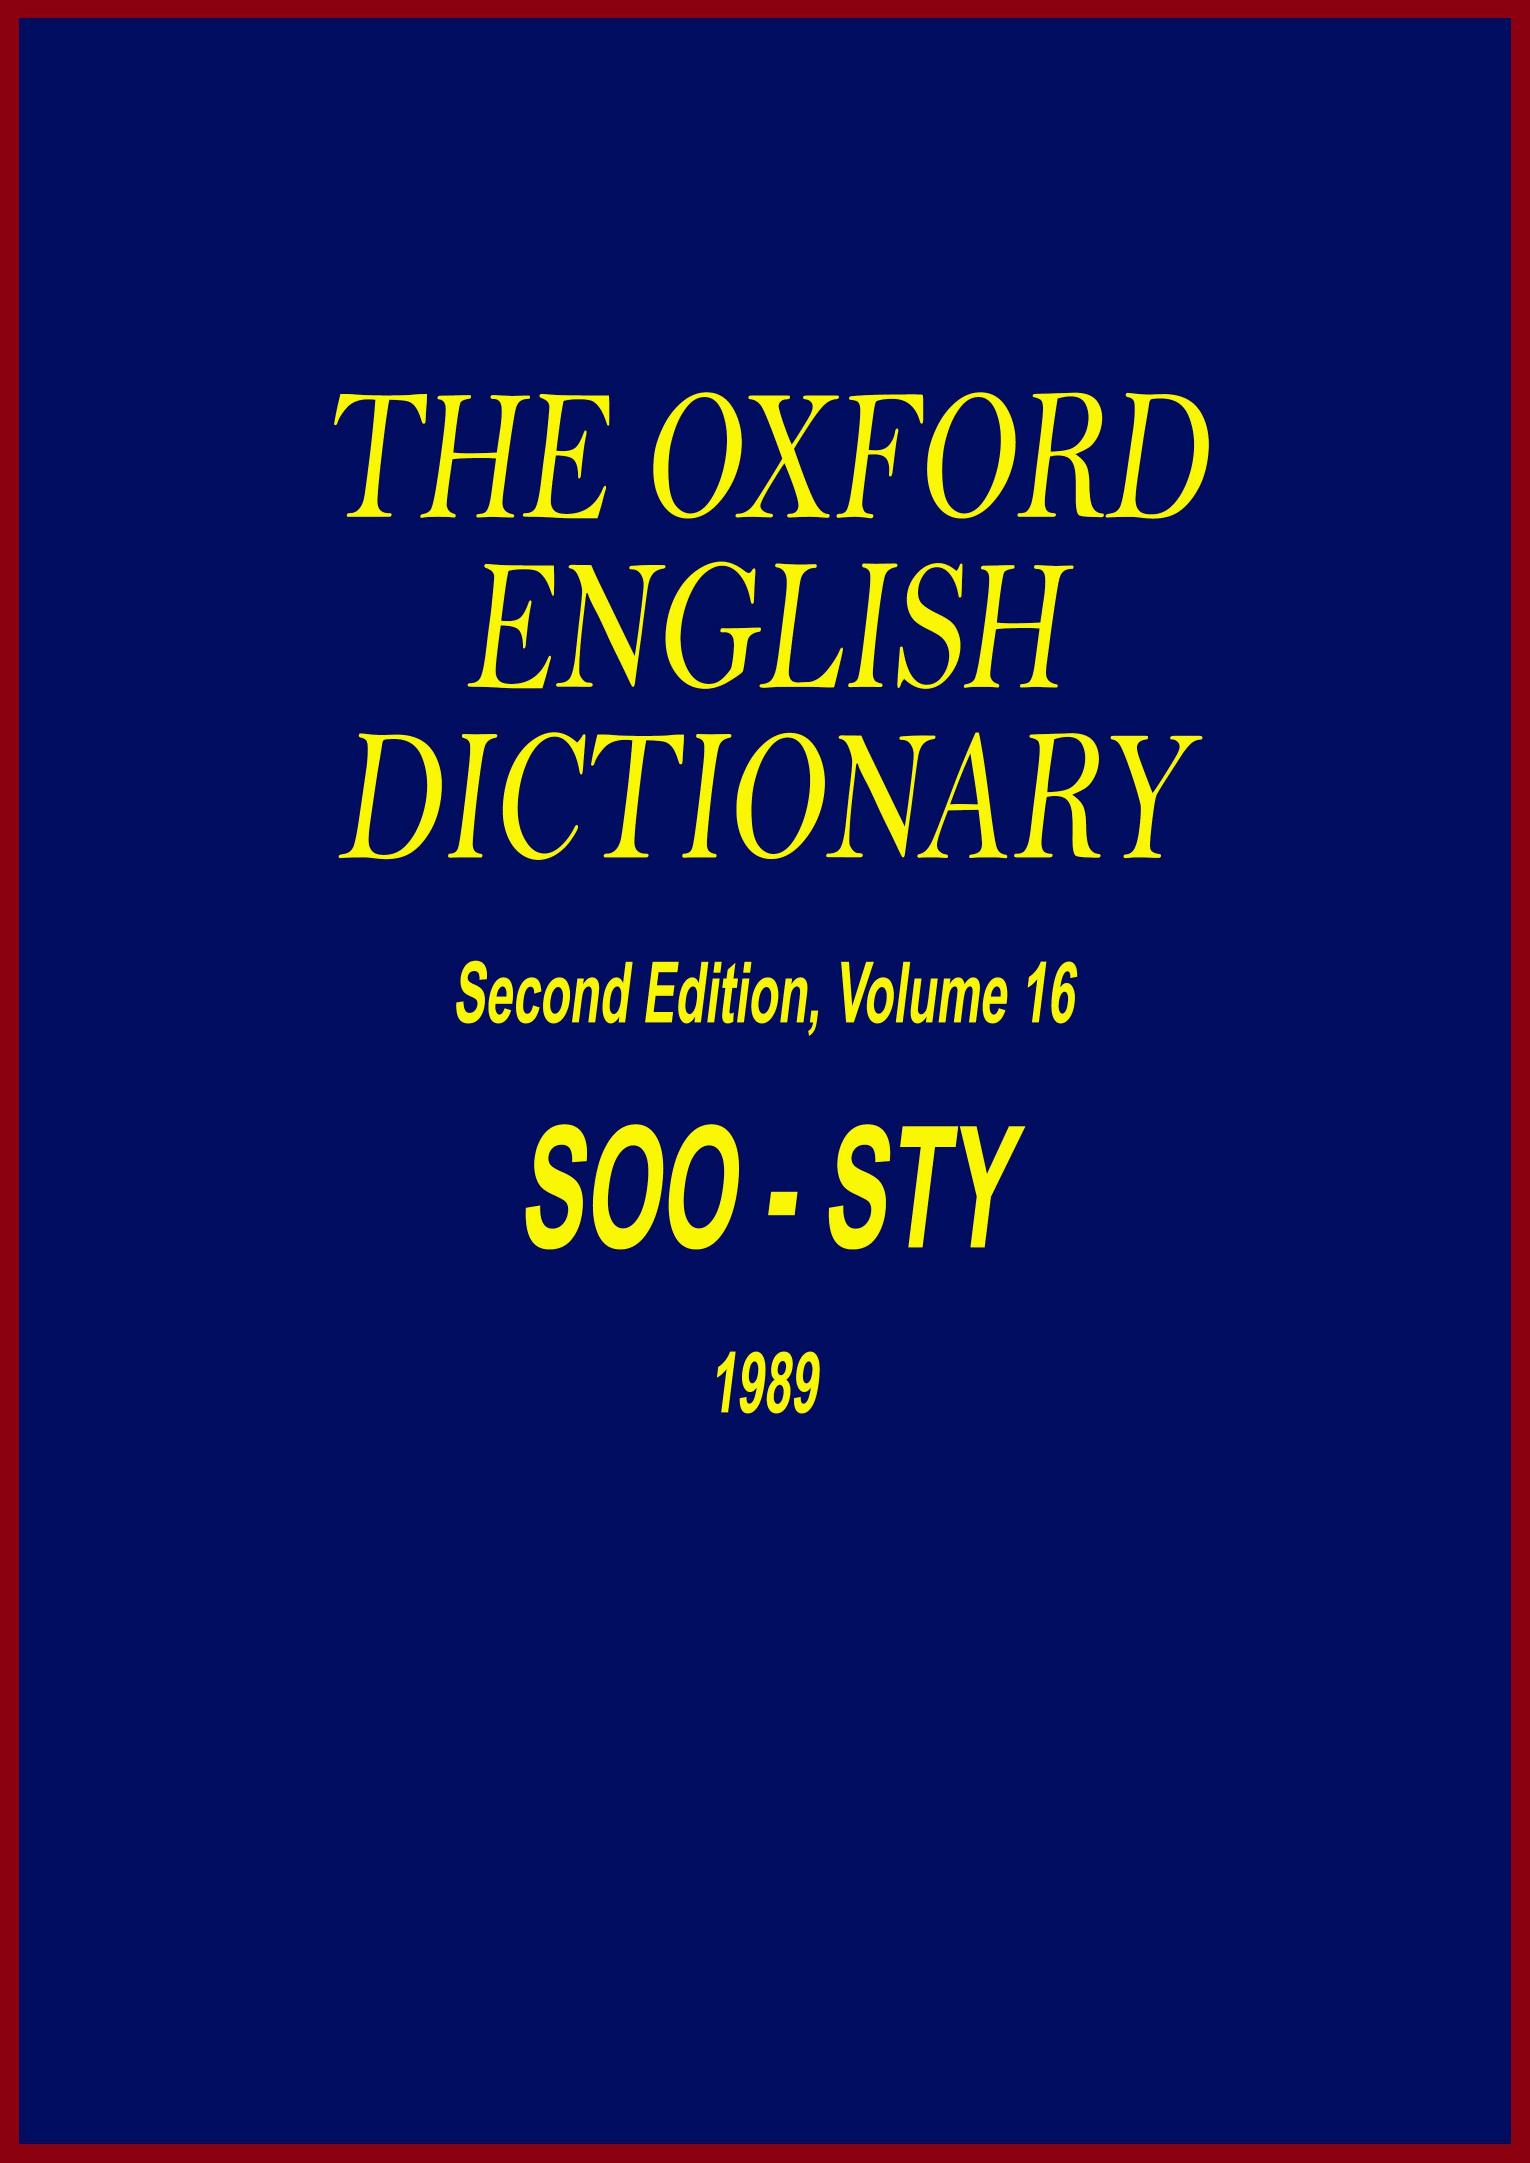 The Oxford English Dictionary - SOO-STY